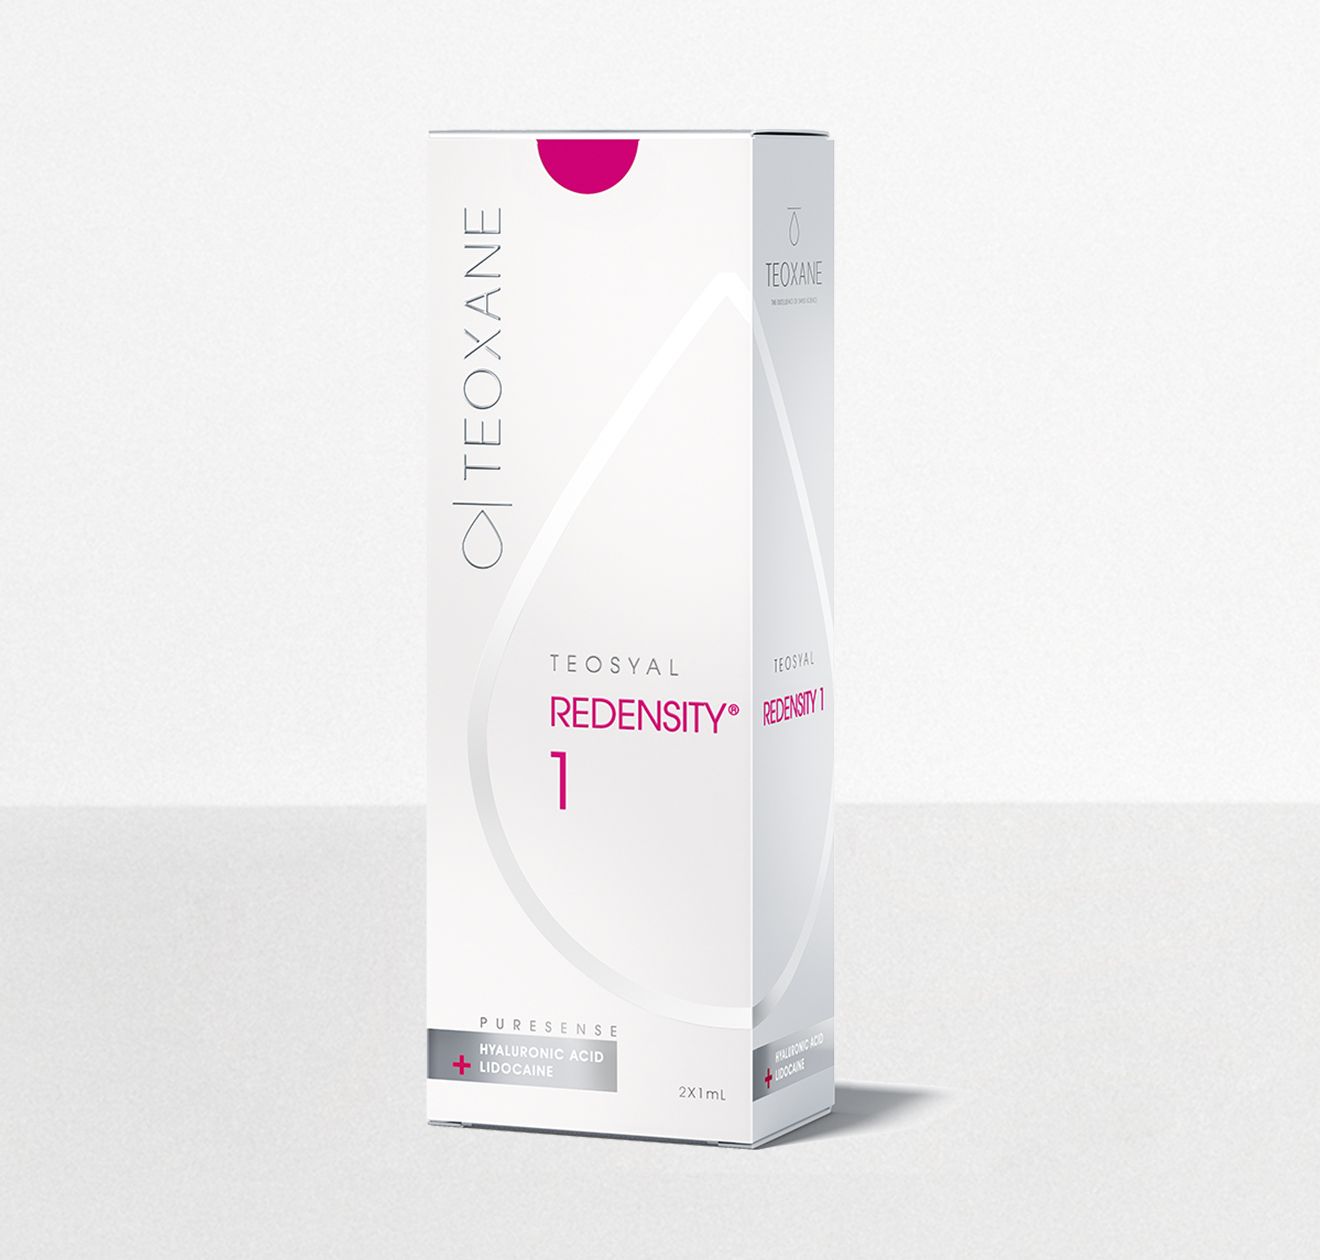 TEOSYAL® PURESENSE REDENSITY 1 SKIN REDENSIFICATION & PREVENTION OF SIGNS OF AGEING